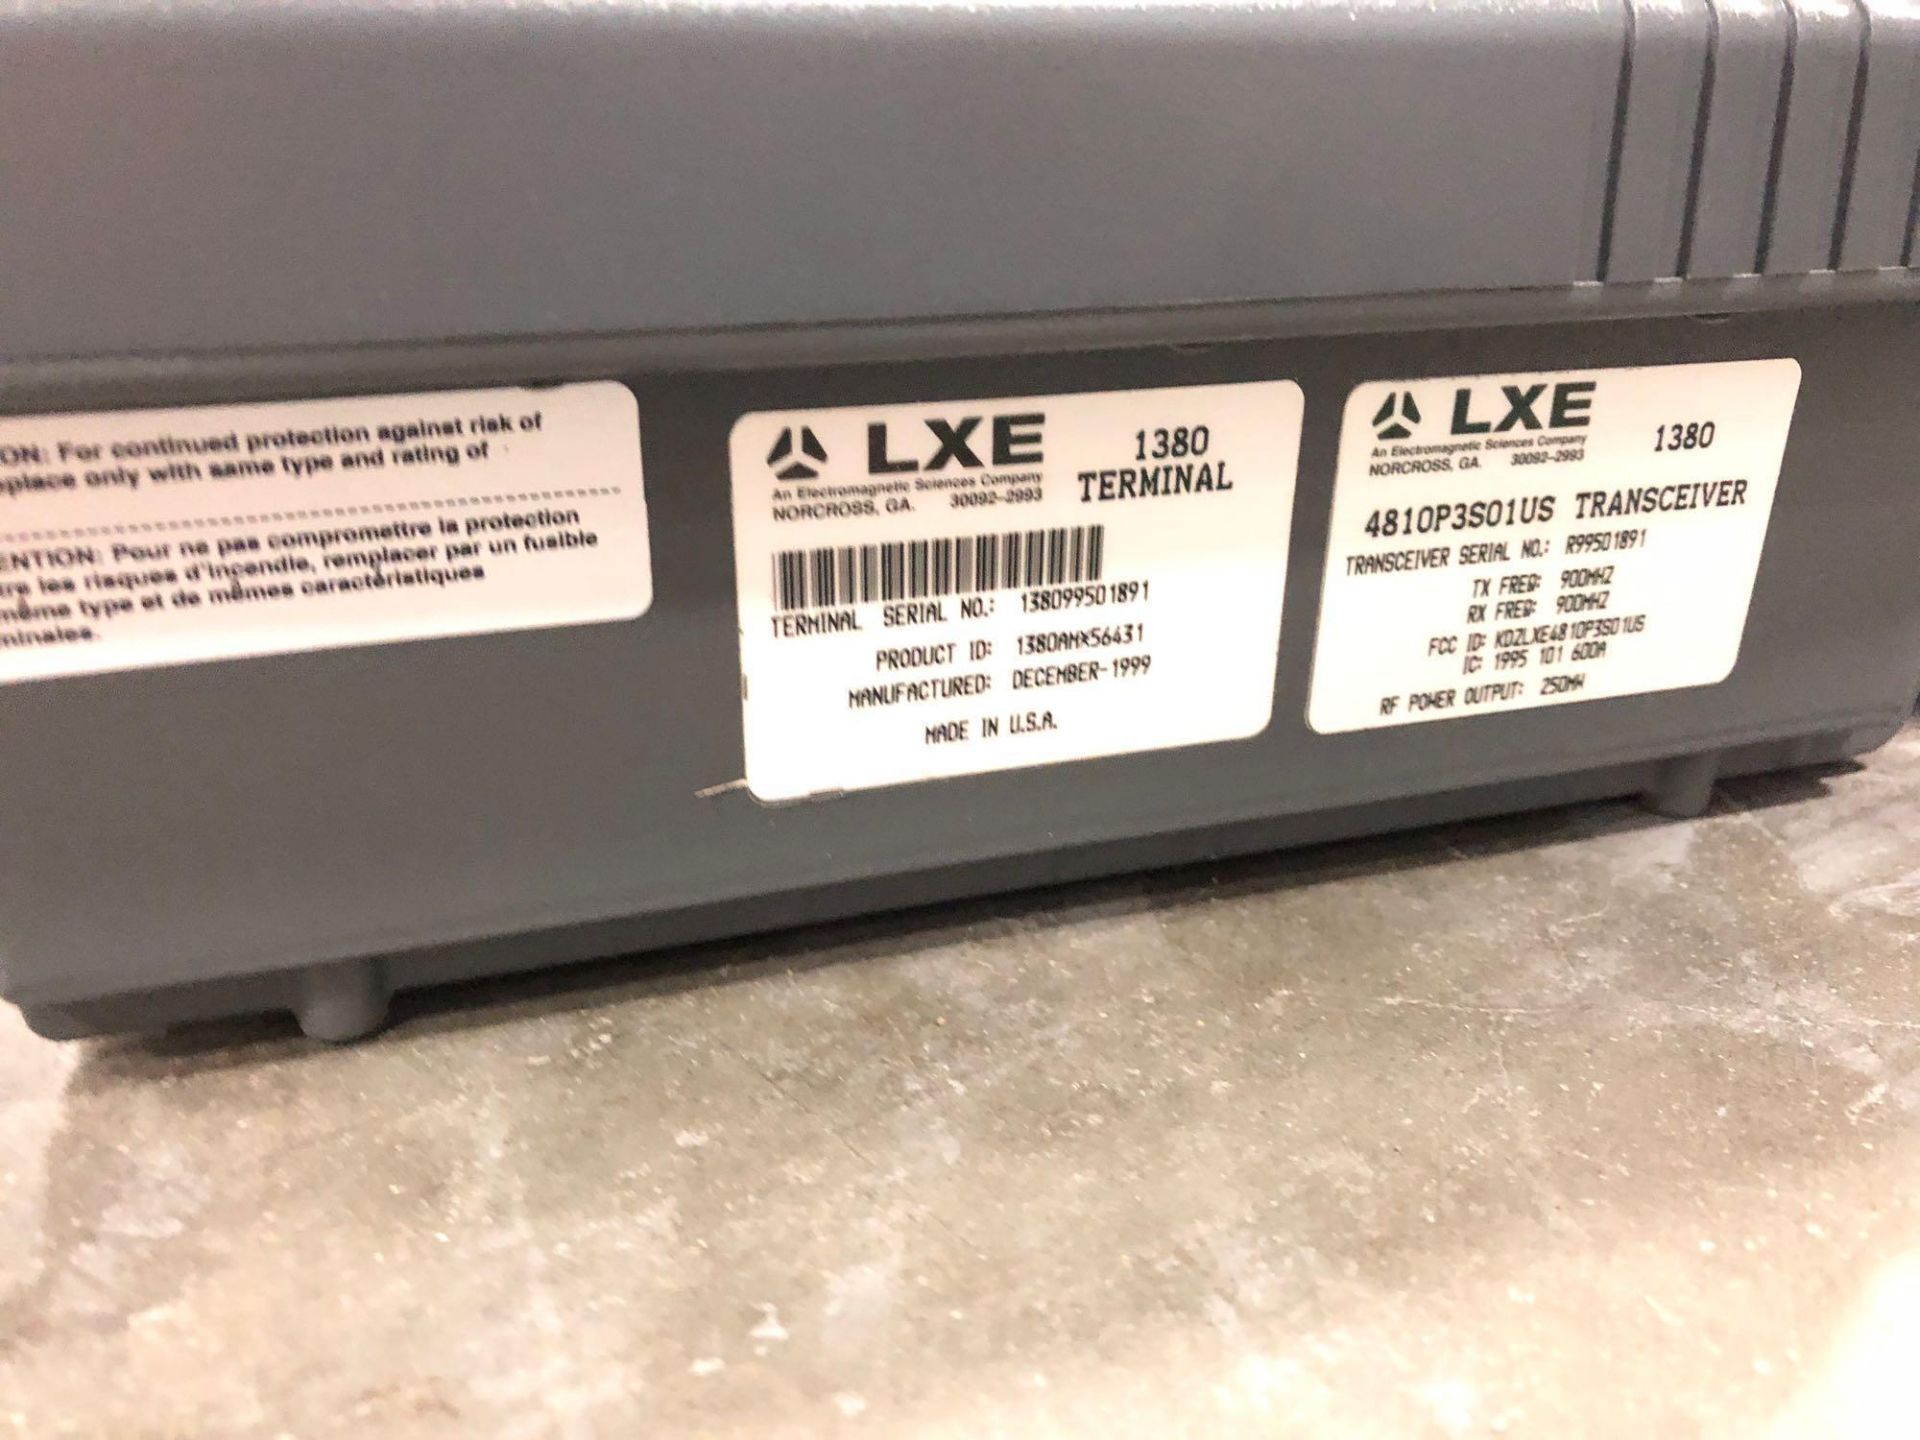 TWO LXE 1380/90 TERMINALS, NEW - Image 3 of 3